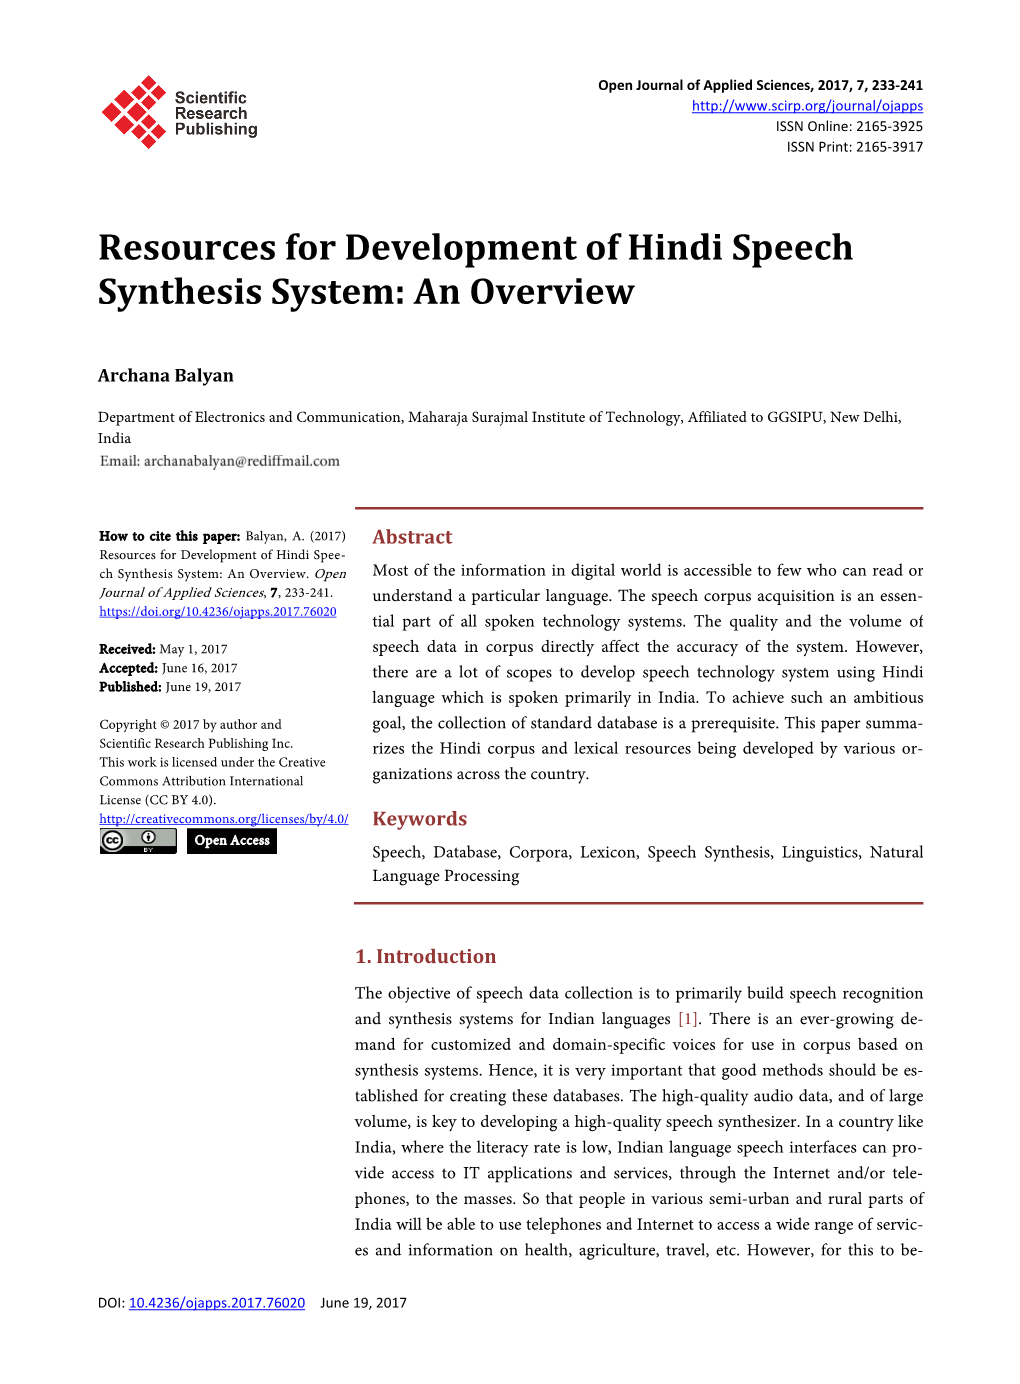 Resources for Development of Hindi Speech Synthesis System: an Overview